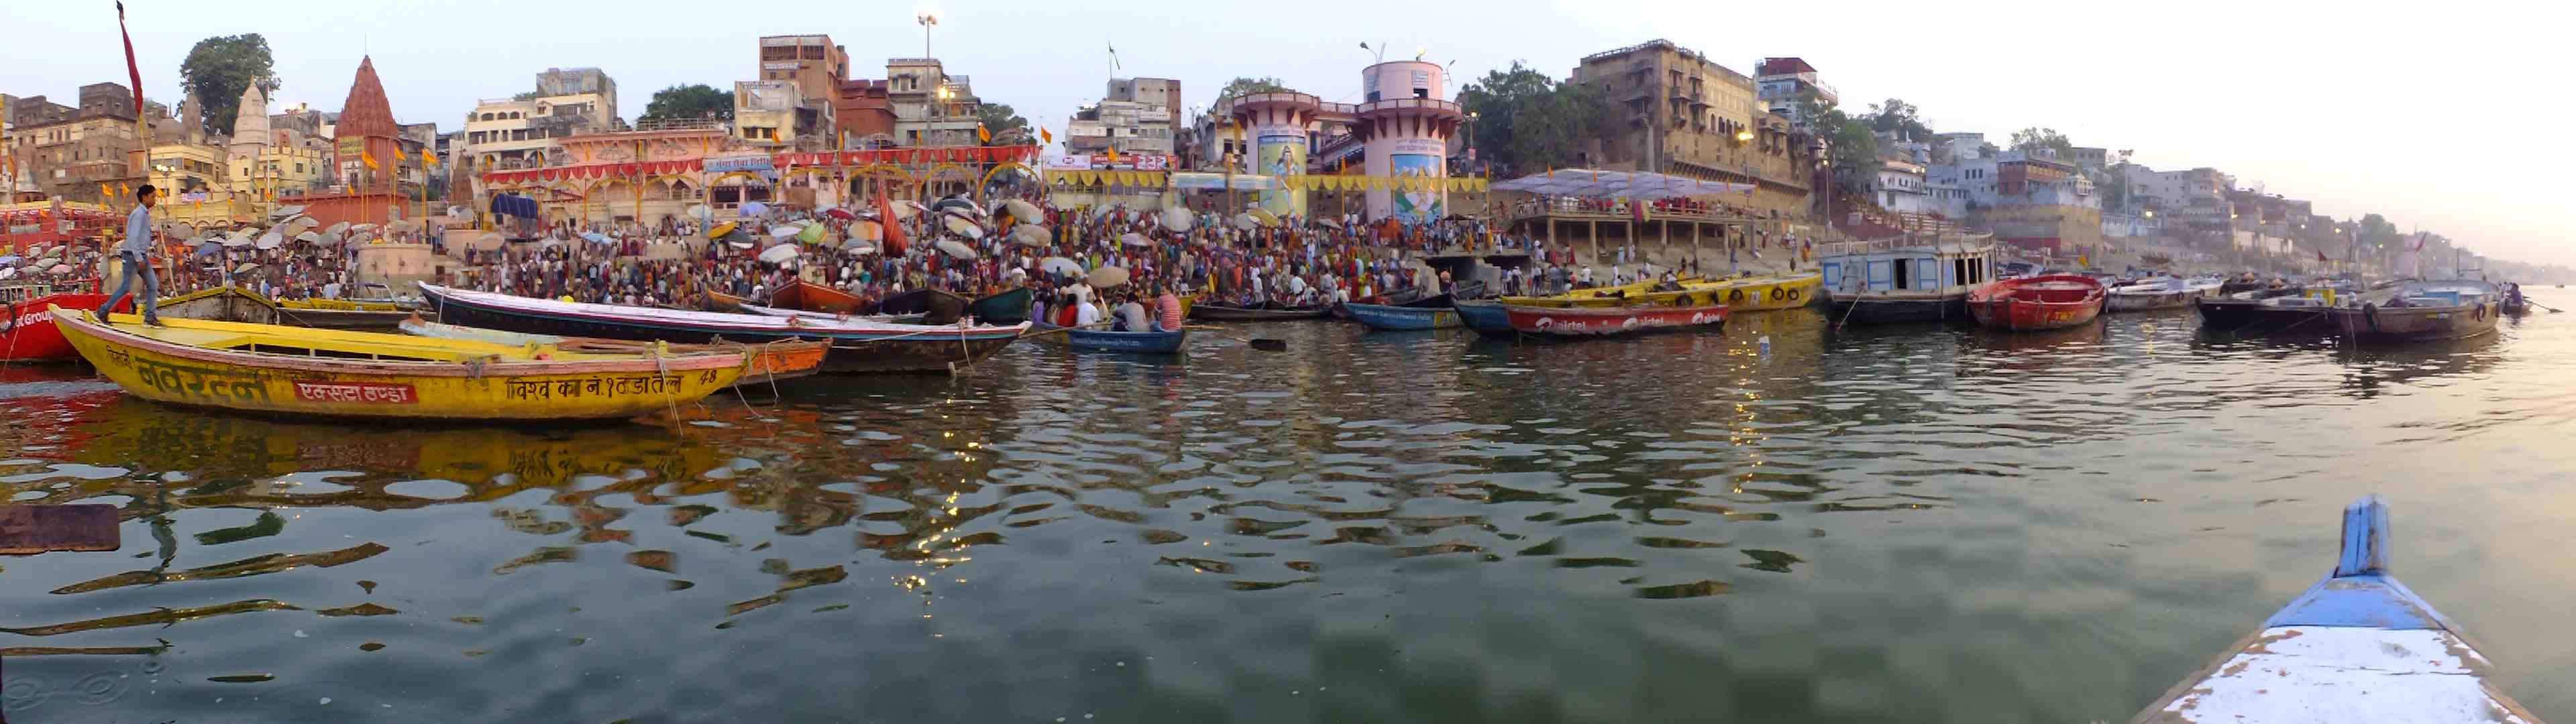 Top 5 holy places to visit in Varanasi